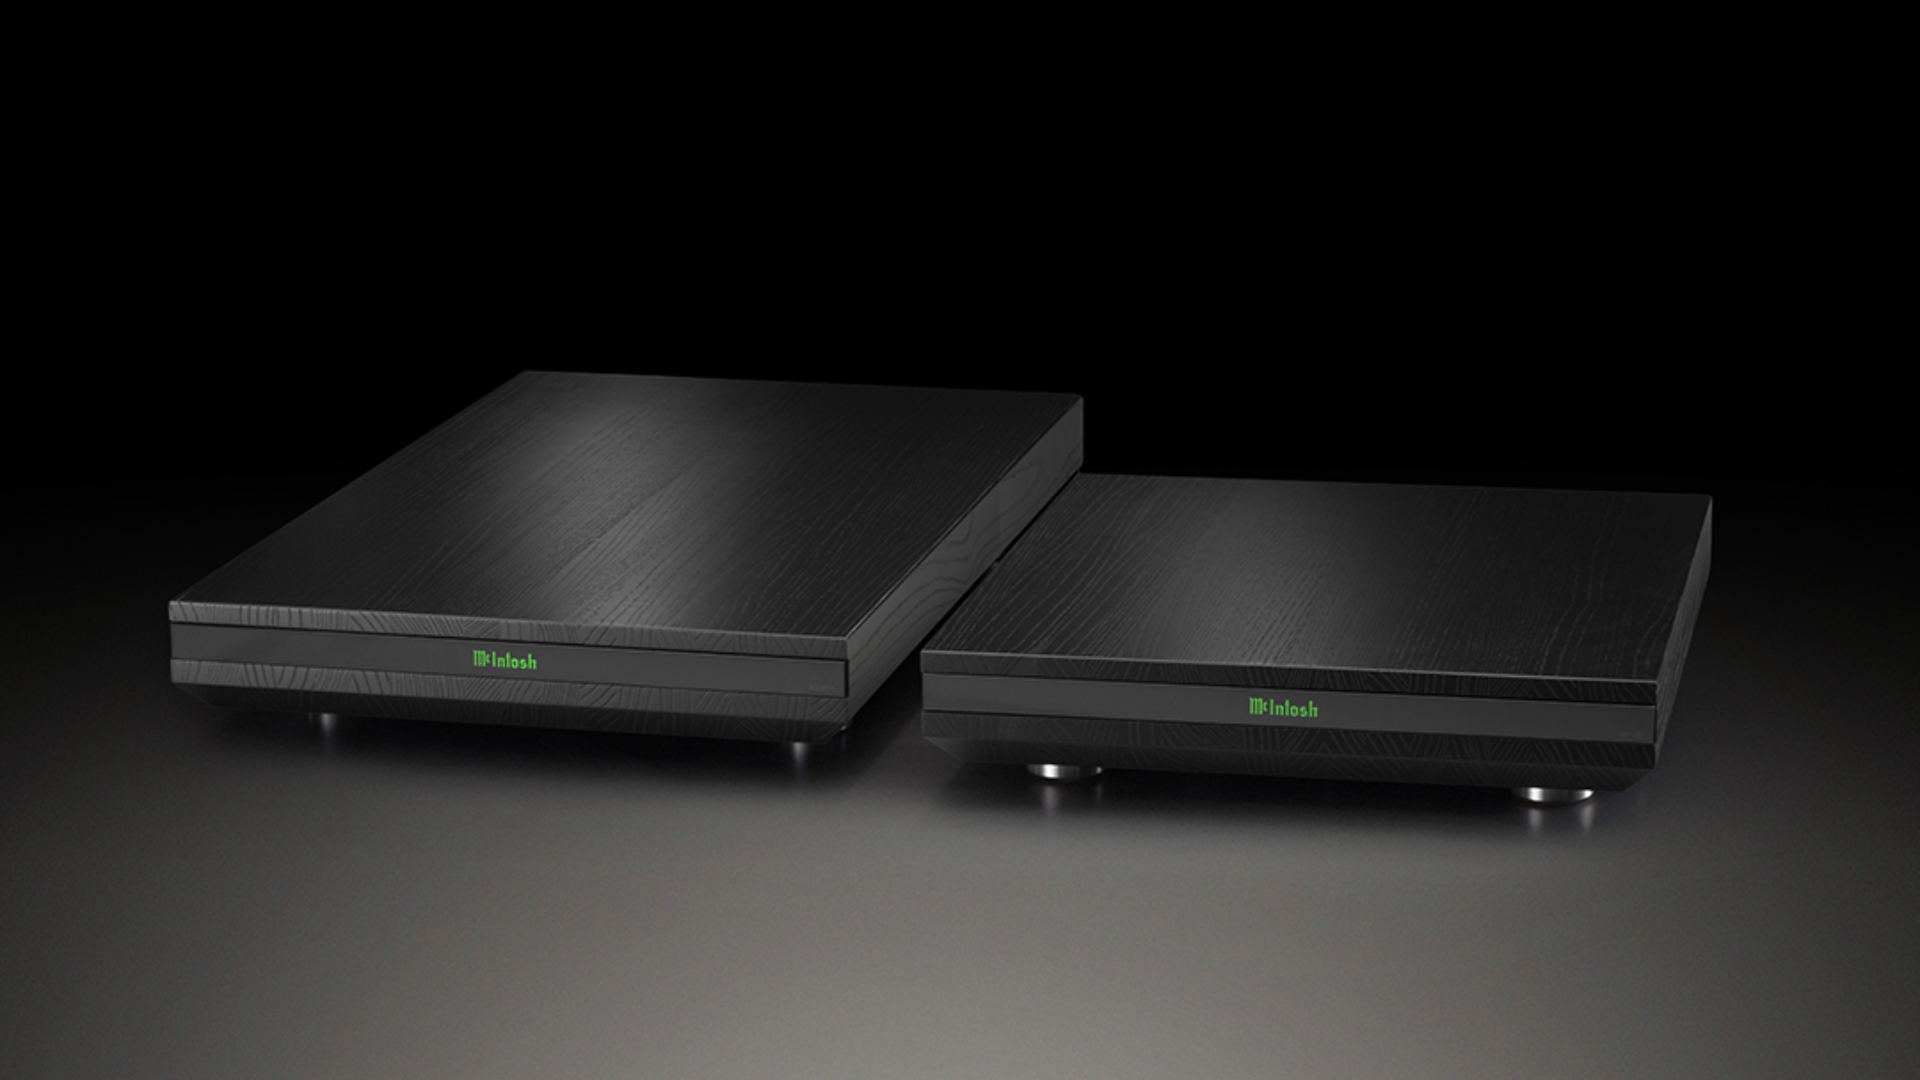 The new bases were designed specifically for McIntosh amplifiers. (Image Credit: McIntosh)